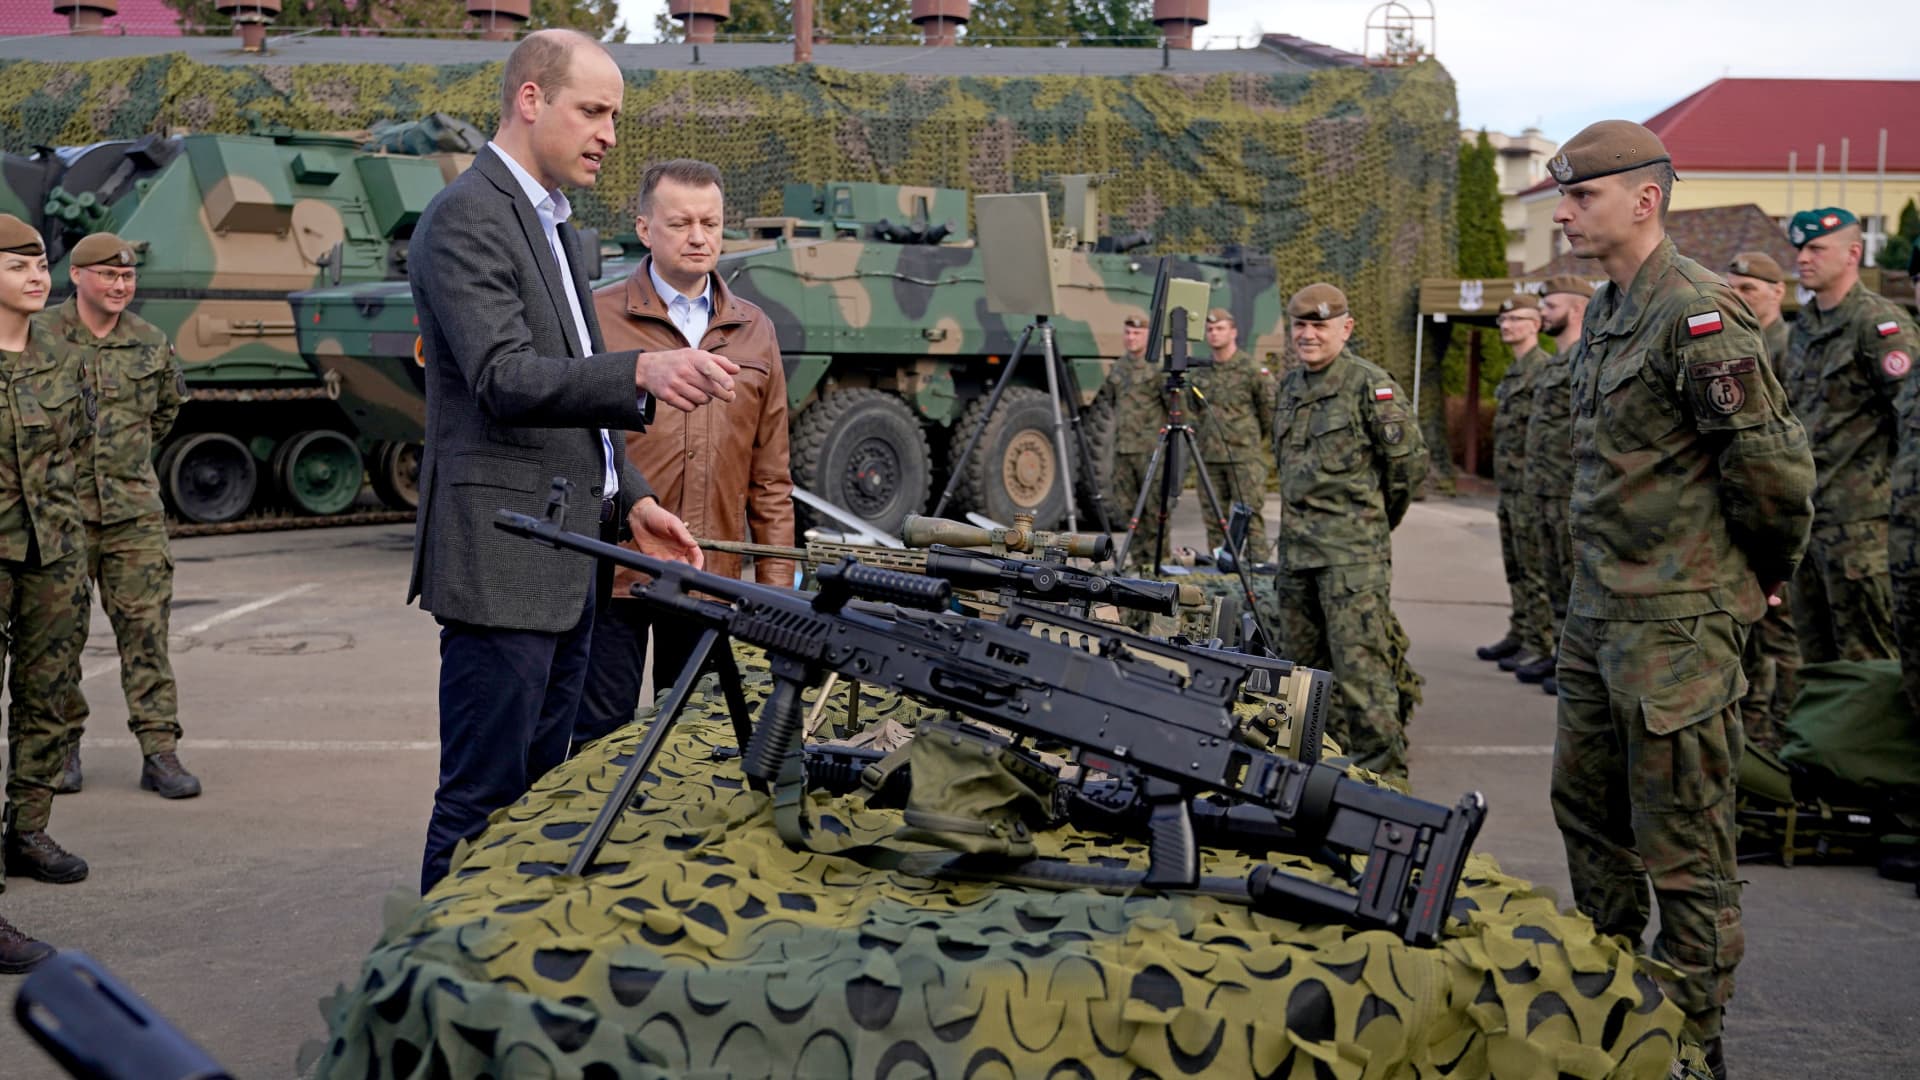 The Prince of Wales viewing military hardware with Polish Deputy Prime Minister and Minister of National Defence, Mariusz Blaszczak, during a visit to the 3rd Brigade Territorial Defence Force base, in Rzeszow, Poland, that has been heavily involved in providing support to Ukraine, March 22, 2023. PA Photo. 